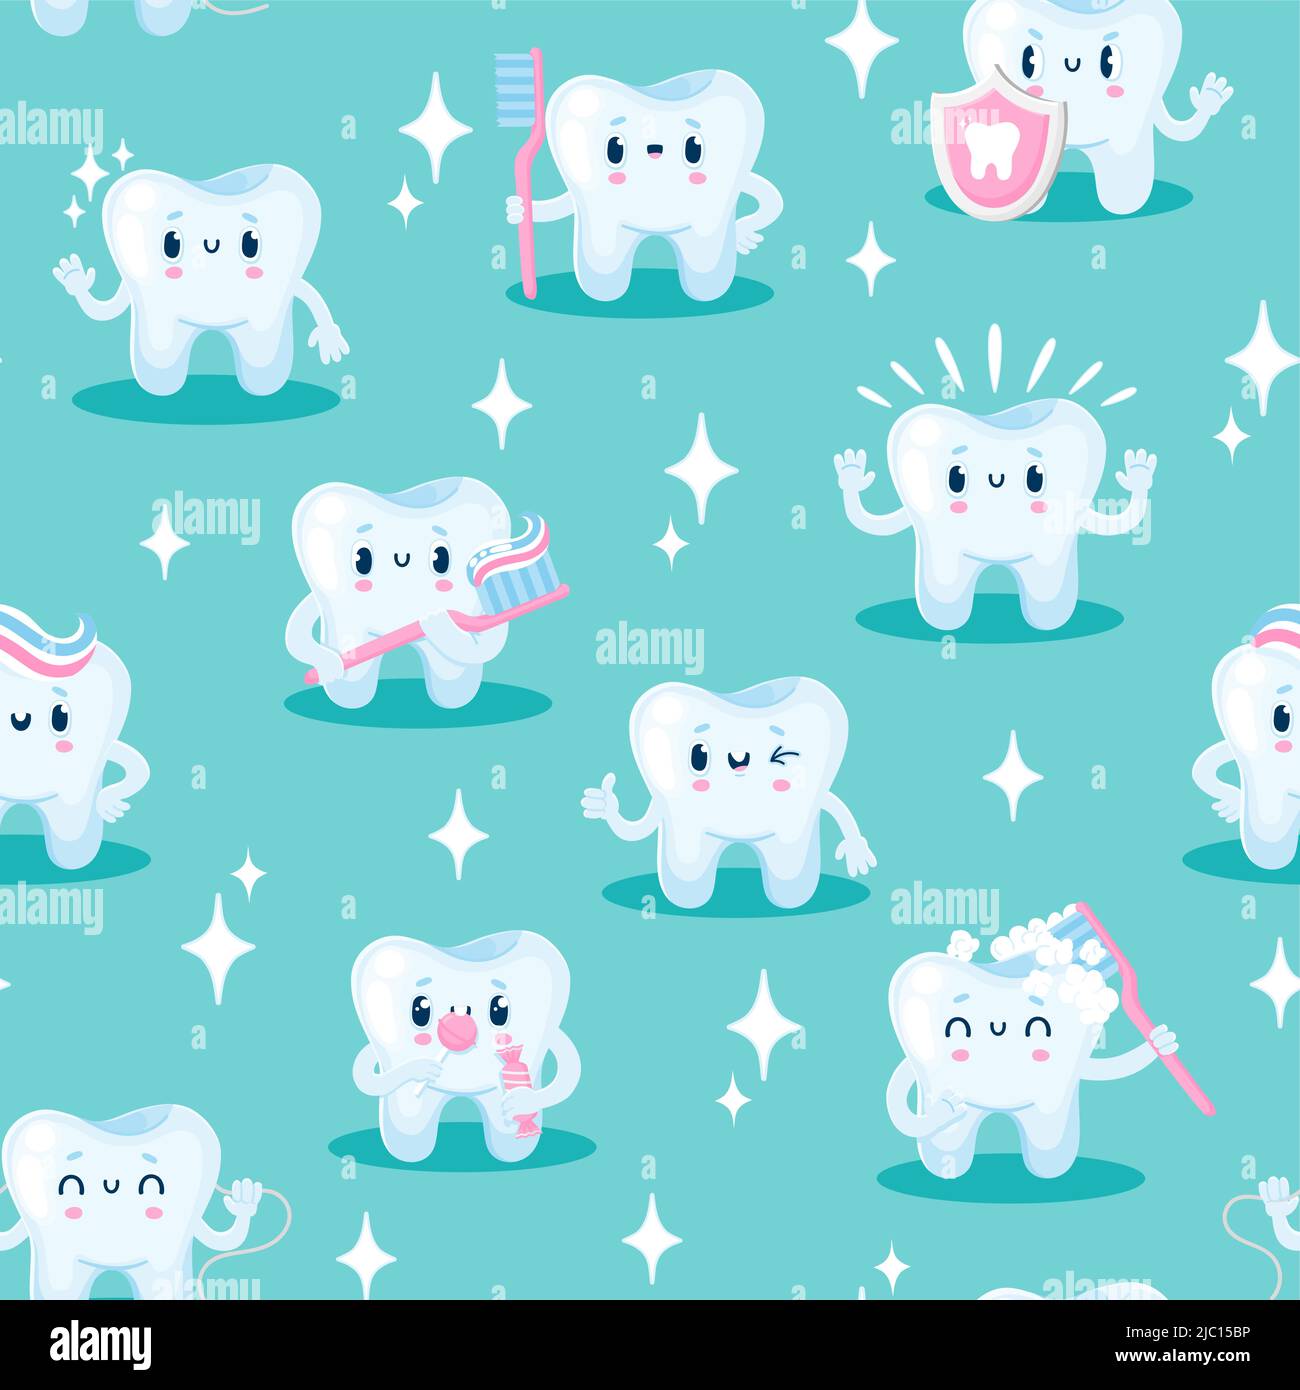 Tooth characters pattern. Seamless print with dentistry cartoon mascot persons with cute faces, dental and oral health concept. Vector texture Stock Vector